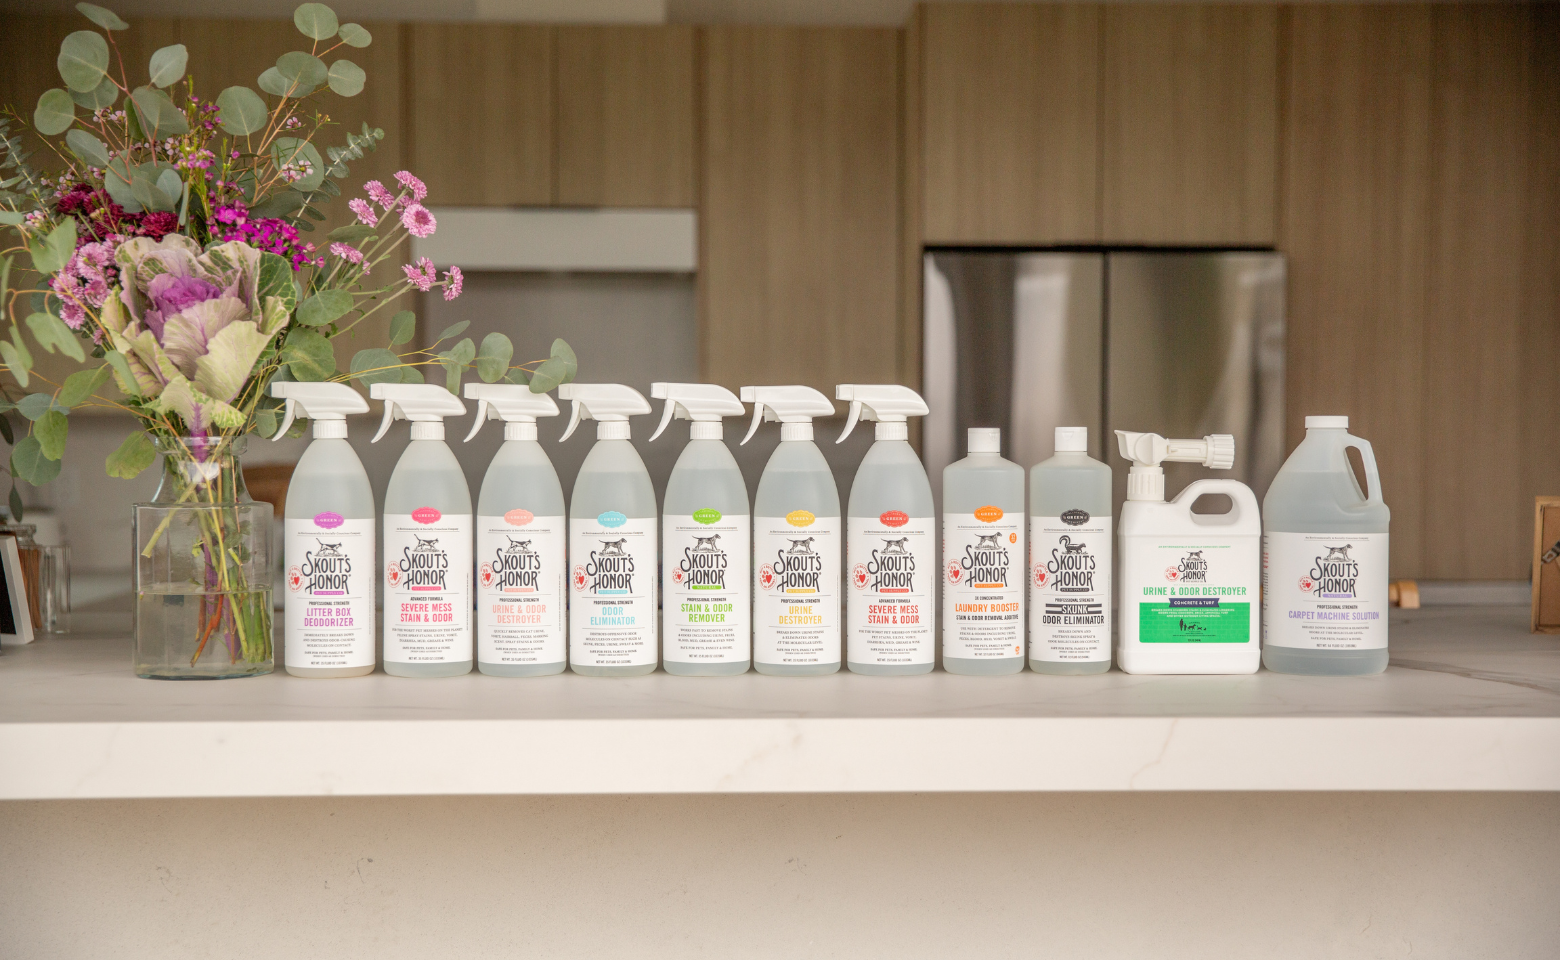 Skout's Honor Stain and Odor Collection for Spring Cleaning